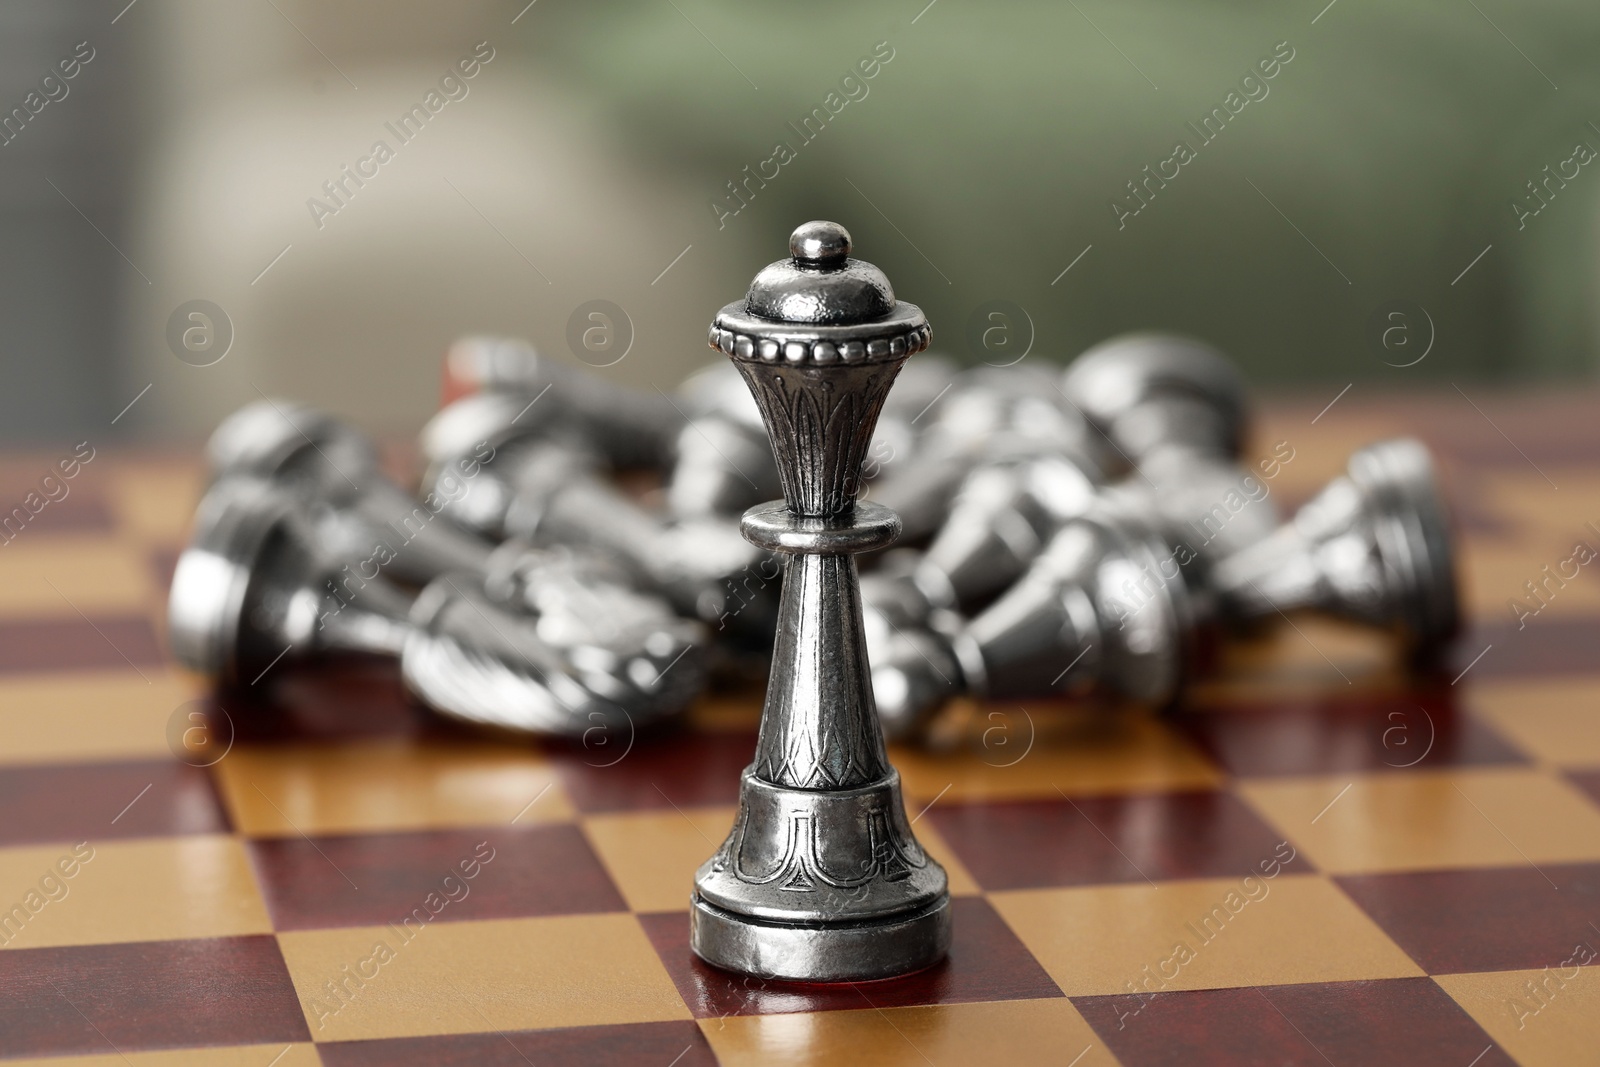 Photo of Silver bishop on chess board, closeup view